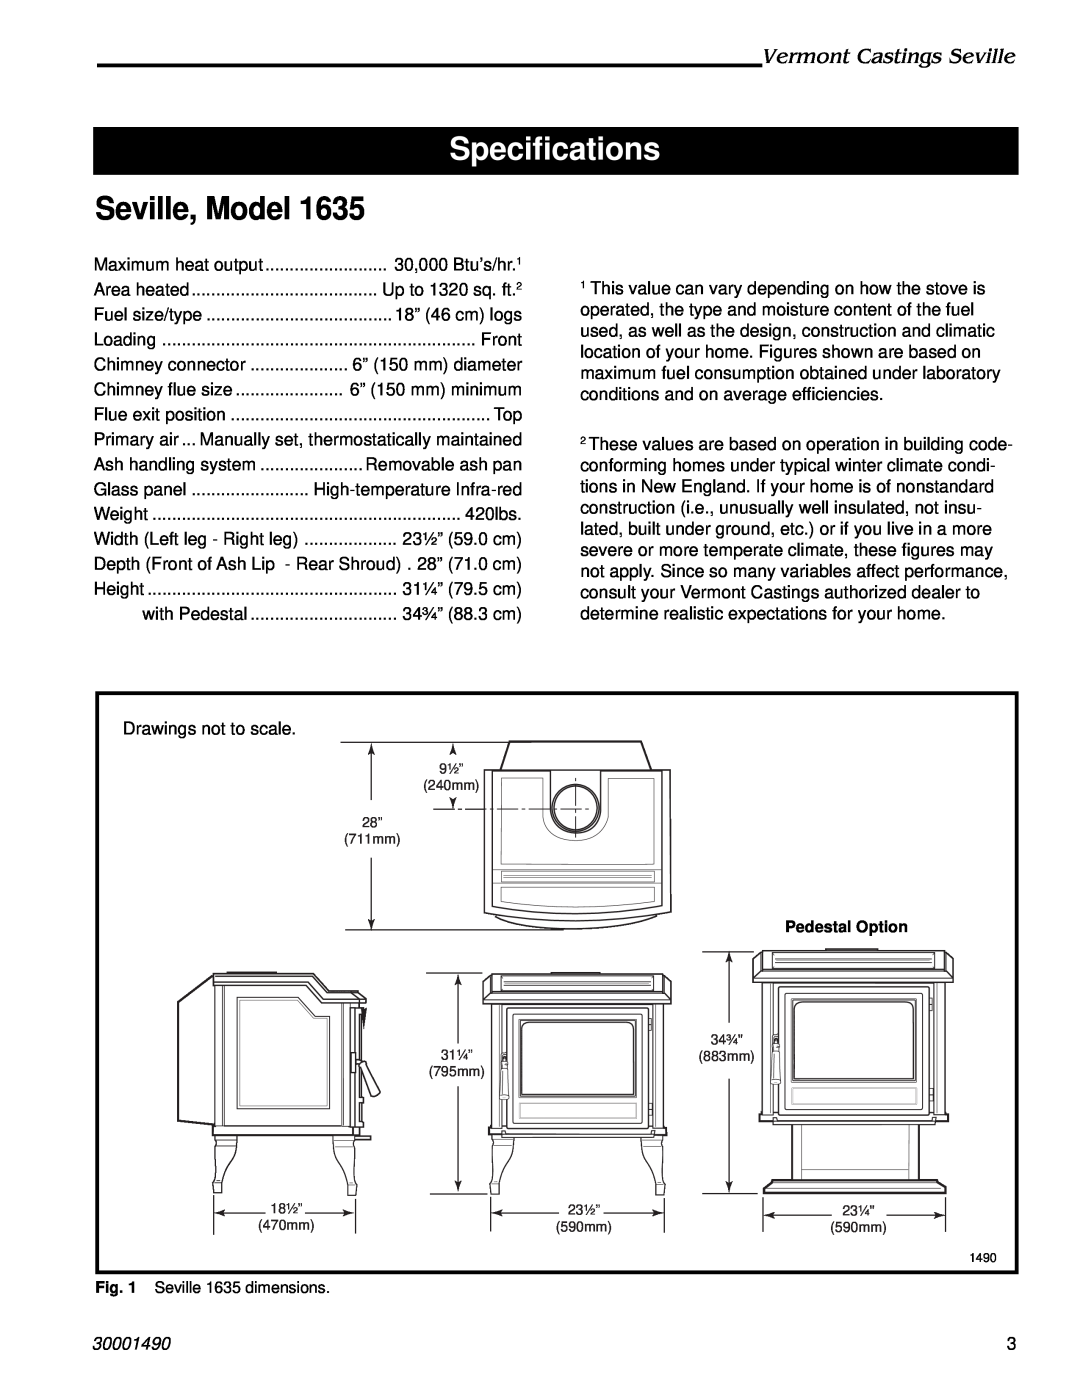 Vermont Casting 1636, 1635, 1638, 1637 Specifications, Seville, Model, Vermont Castings Seville, Drawings not to scale 